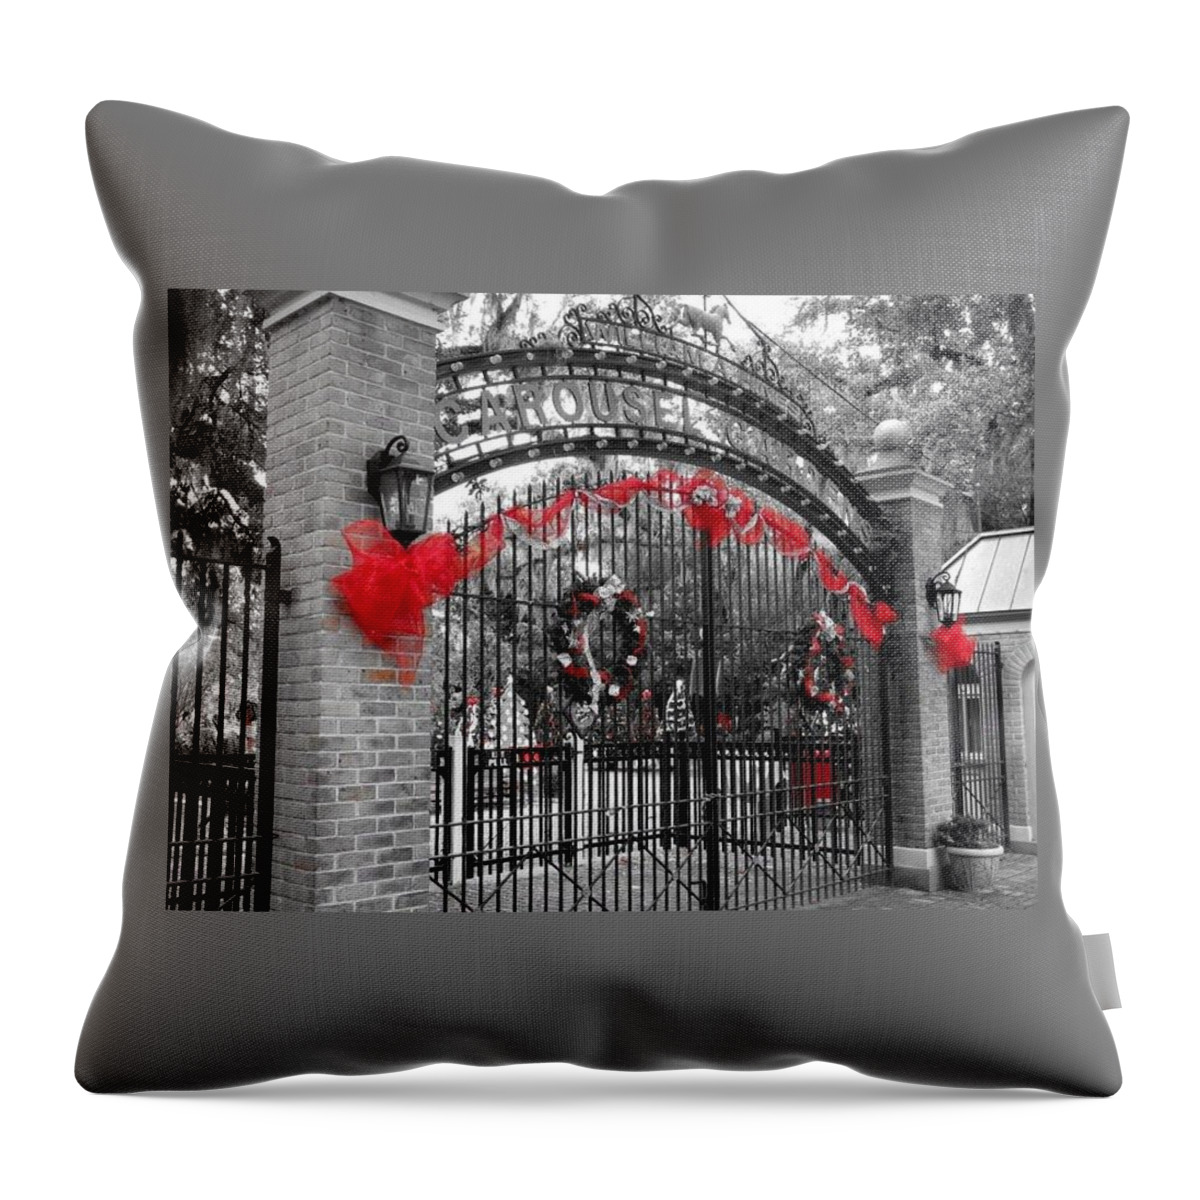 New Orleans City Park Throw Pillow featuring the photograph Carousel Gardens - New Orleans City Park by Deborah Lacoste